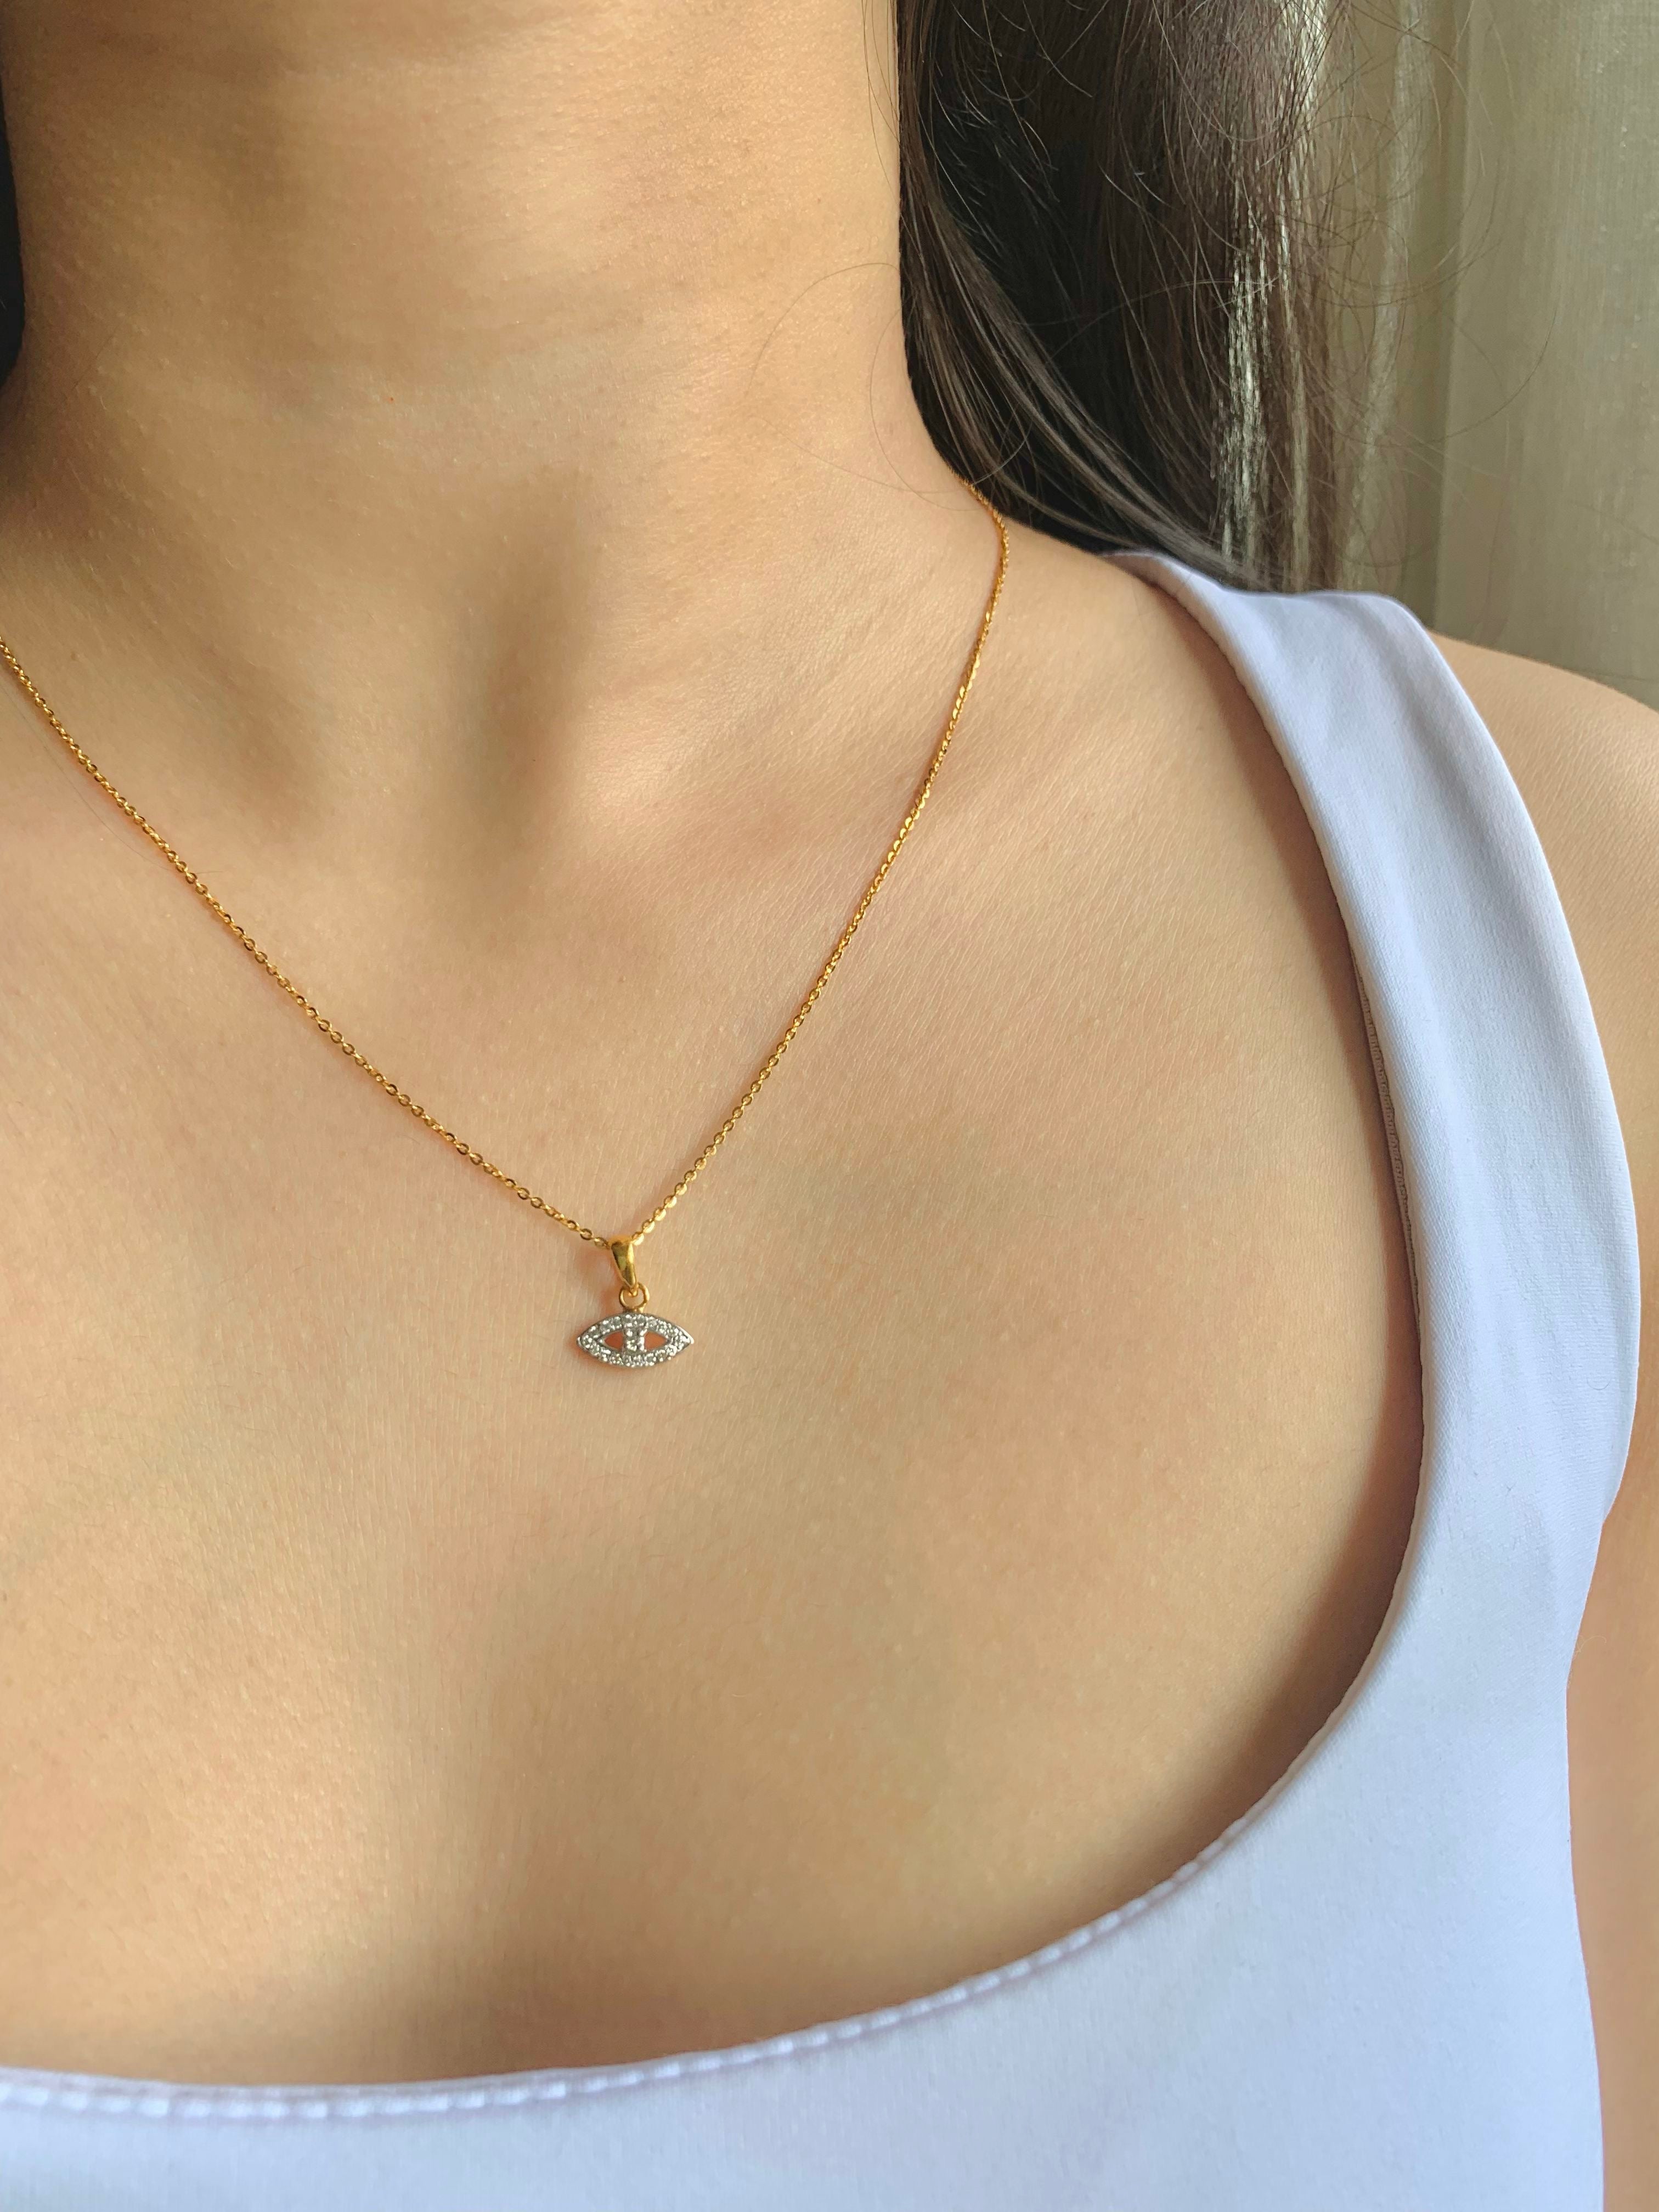 Mini Heart Chain and Pendant Necklace in Gold | Uncommon James